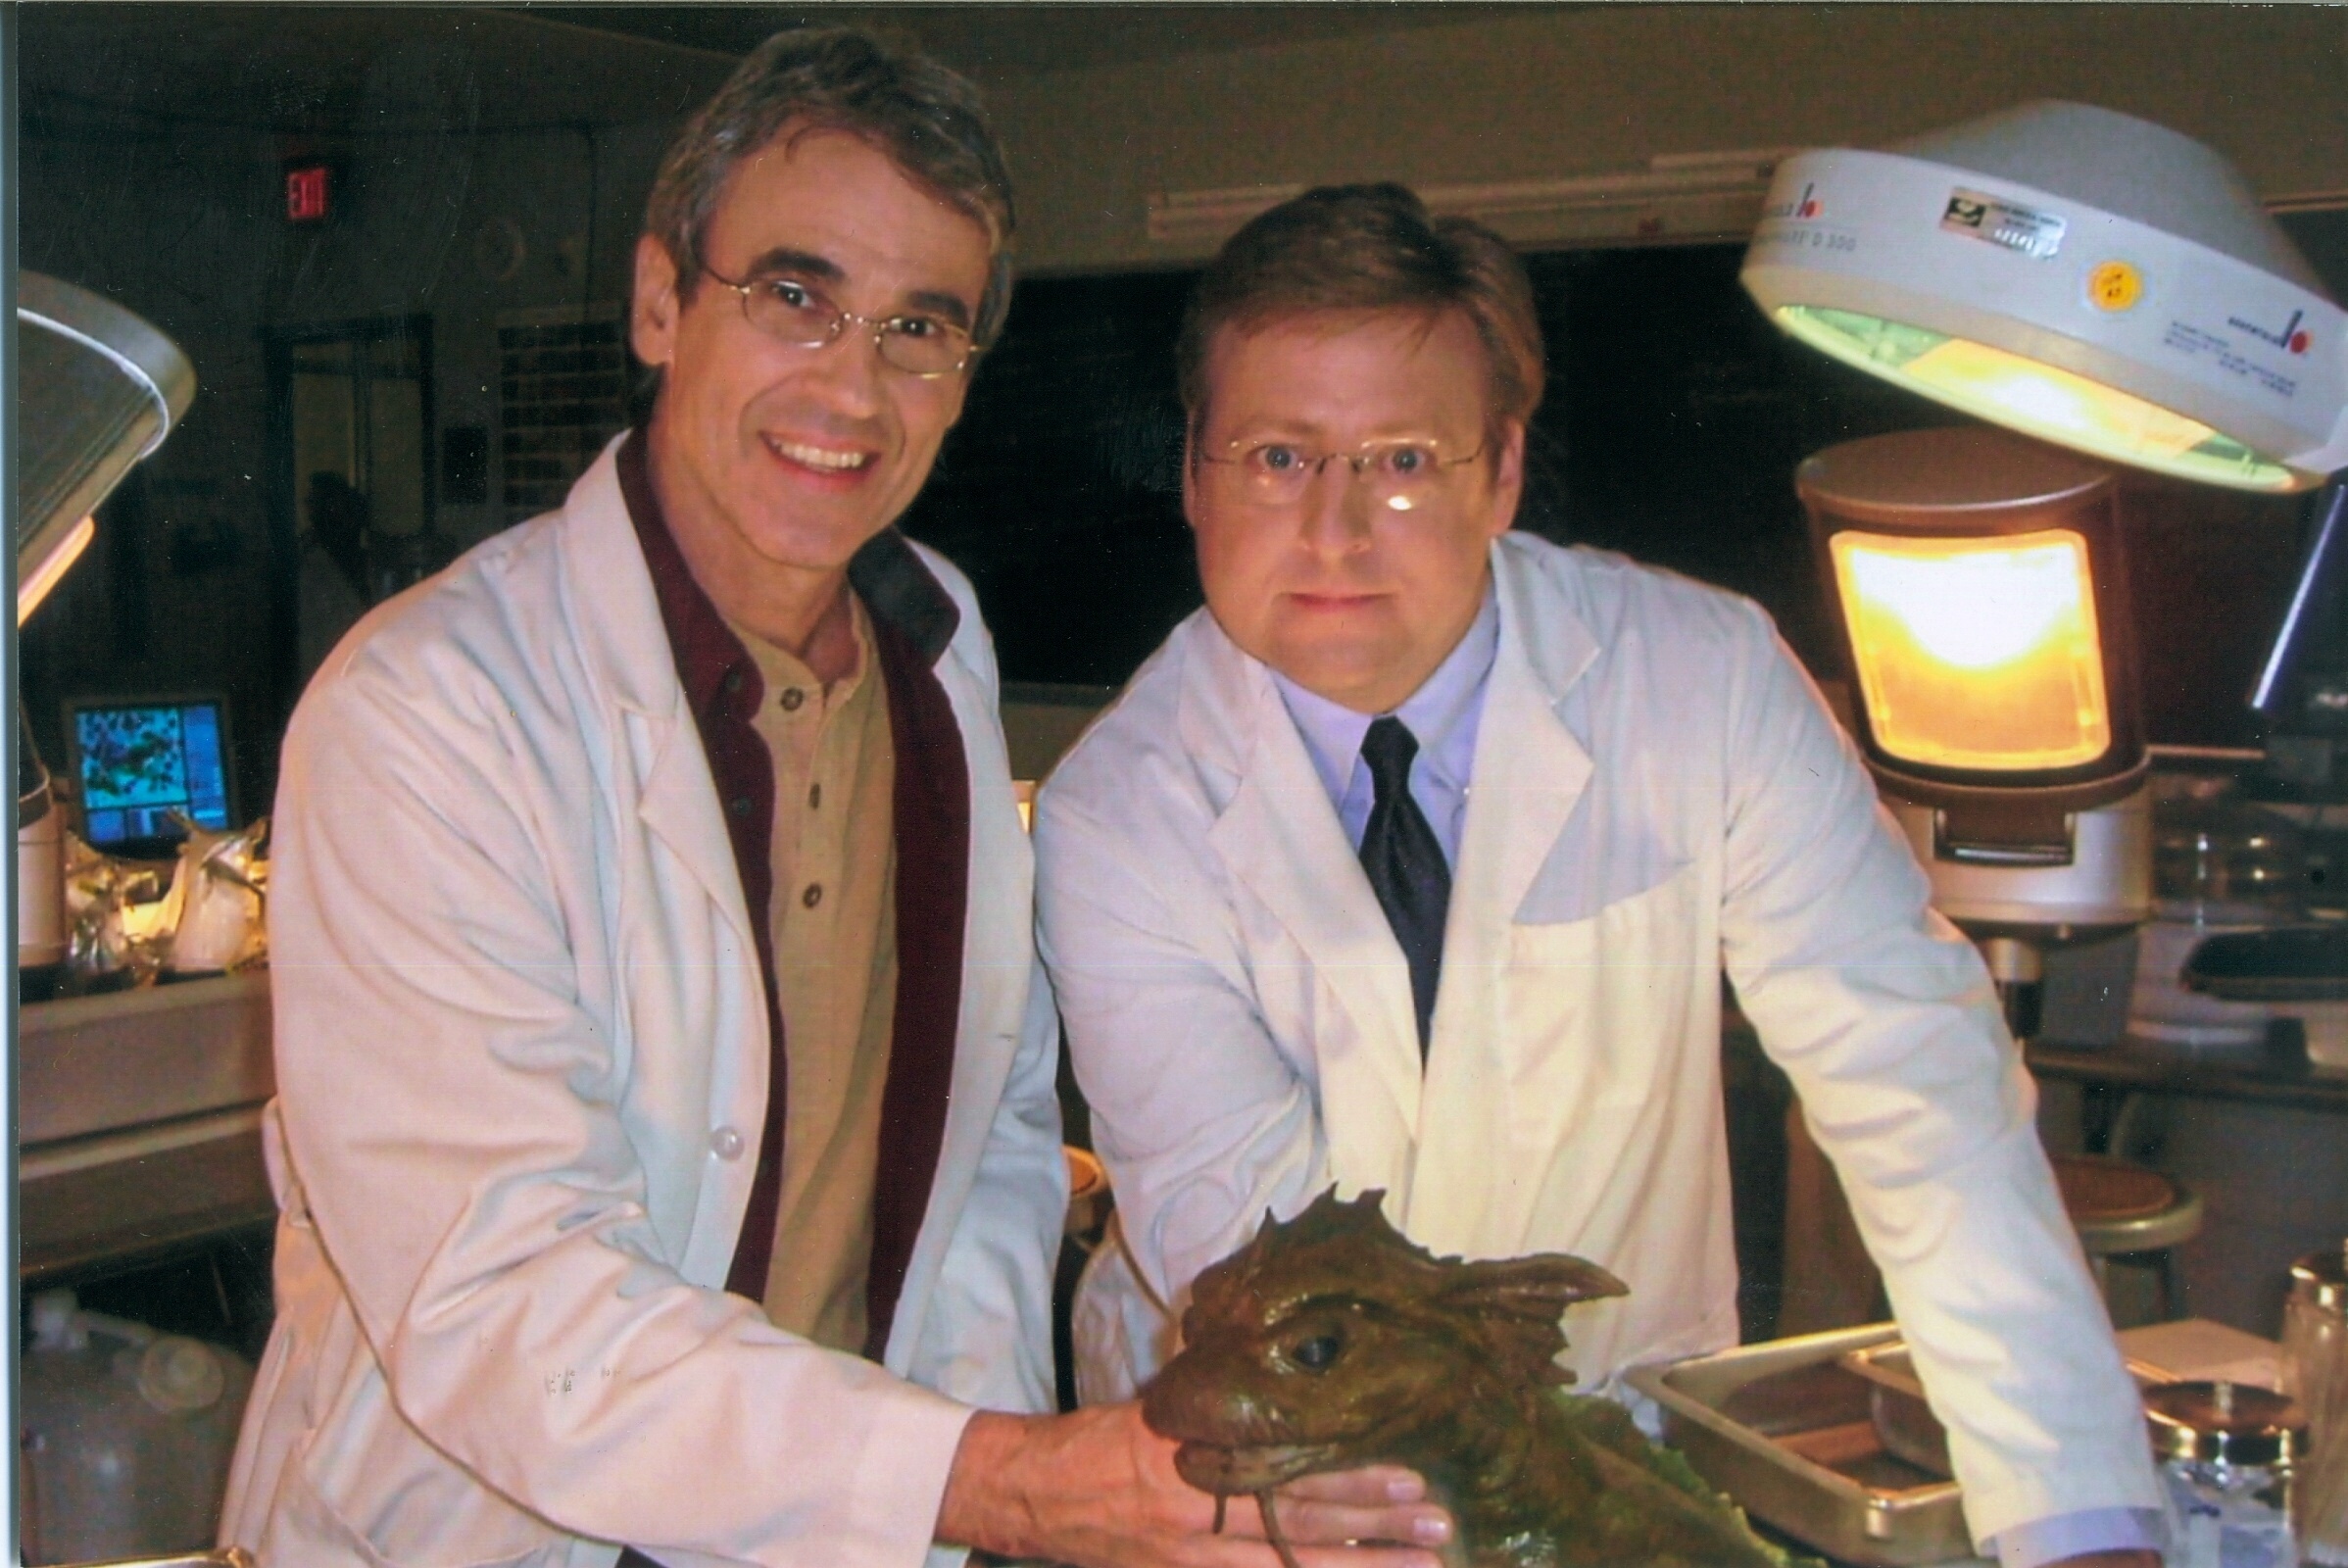 SURFACE: Patt Noday: (at right) as Dr. Hammacker on the NBC Network sci-fi series, 